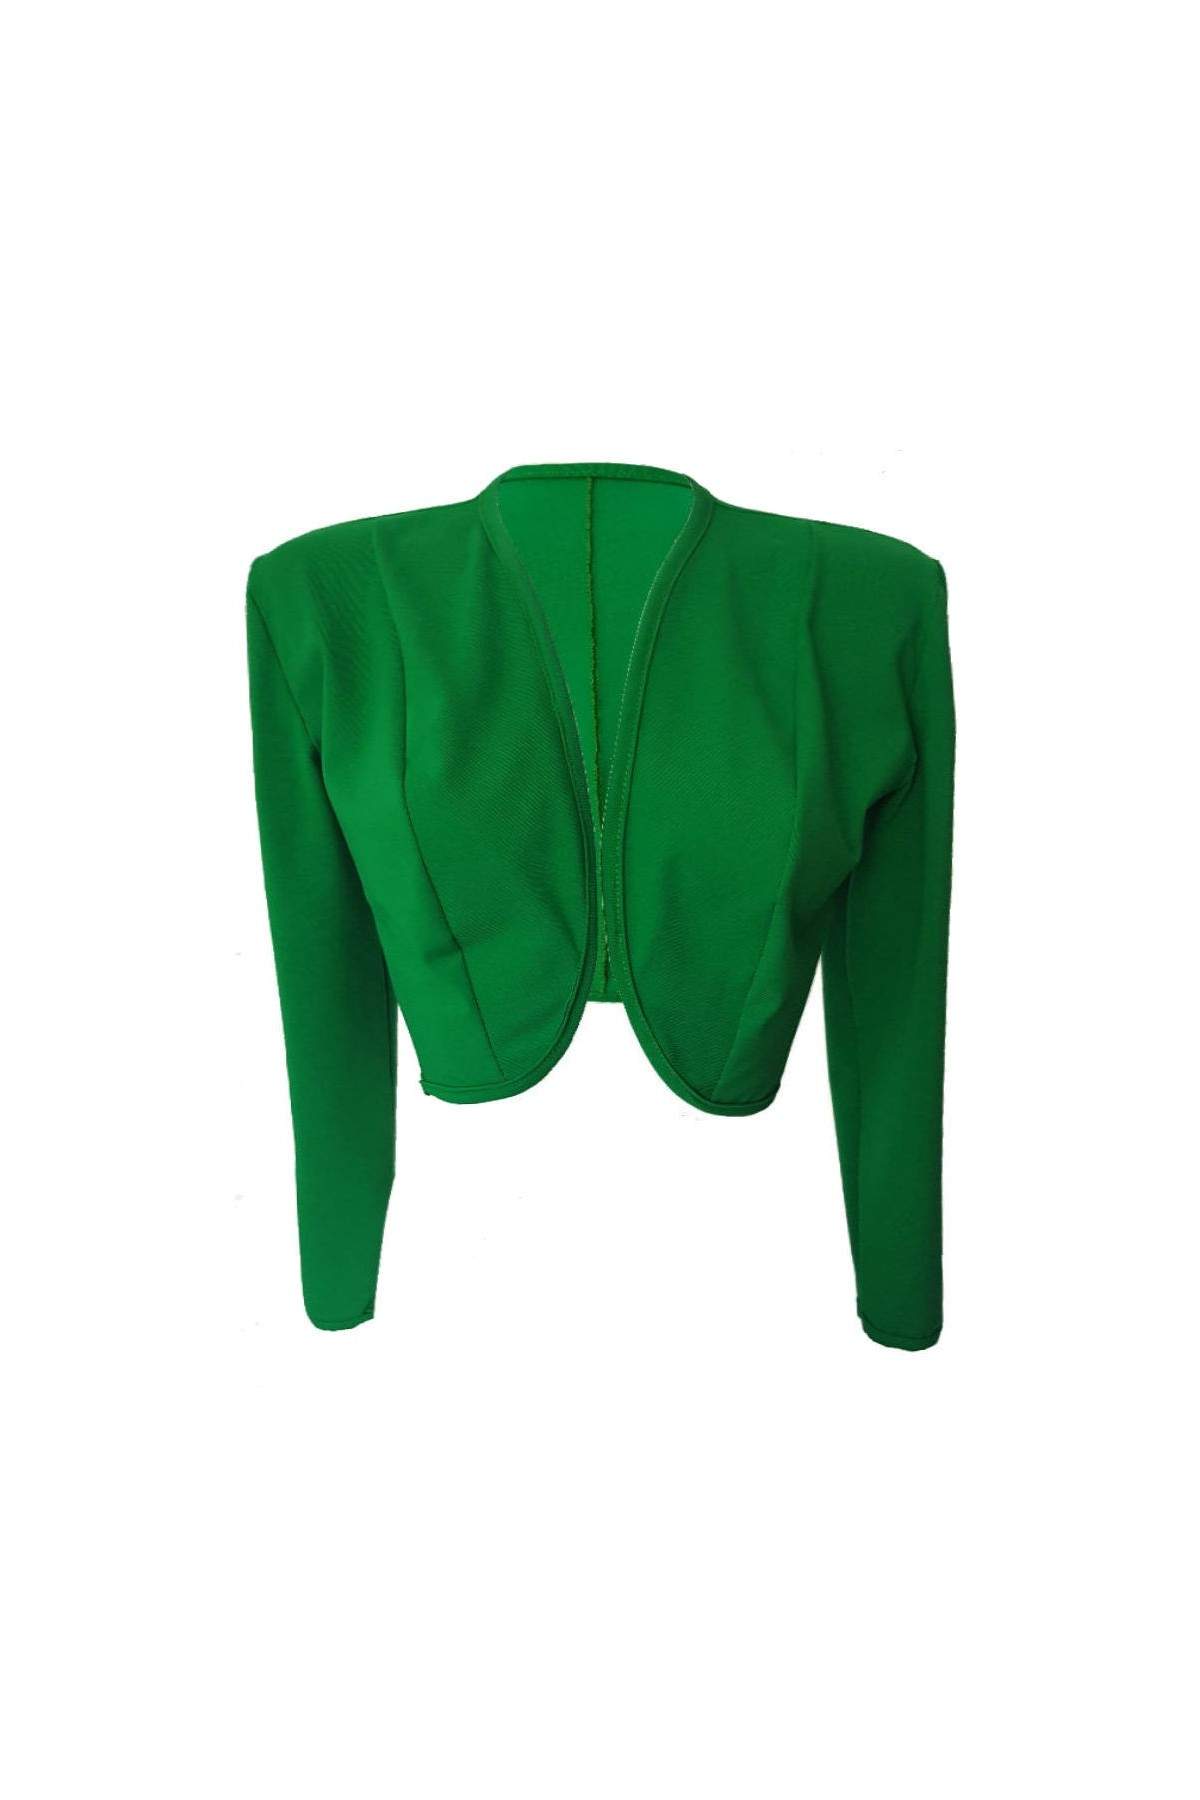 Save 15 percent on Sizes 34 - 52 Green Cotton Stretch Short Jacket ... - 